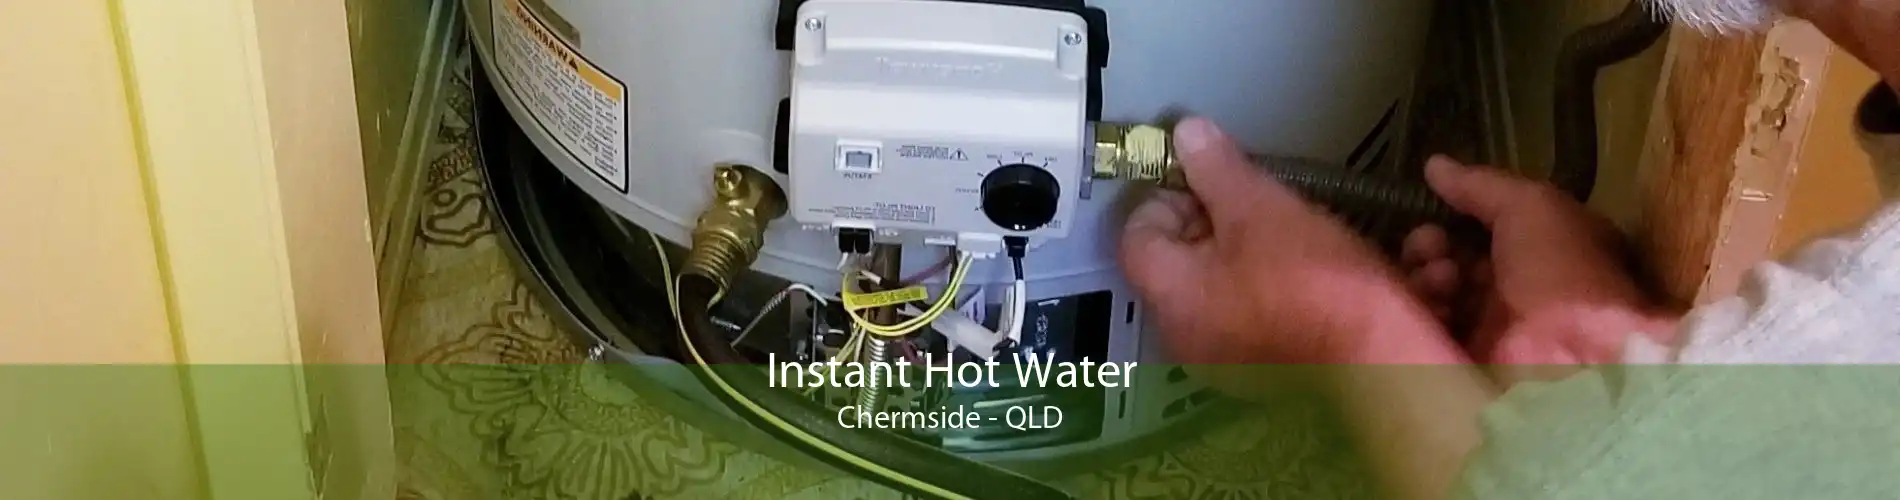 Instant Hot Water Chermside - QLD